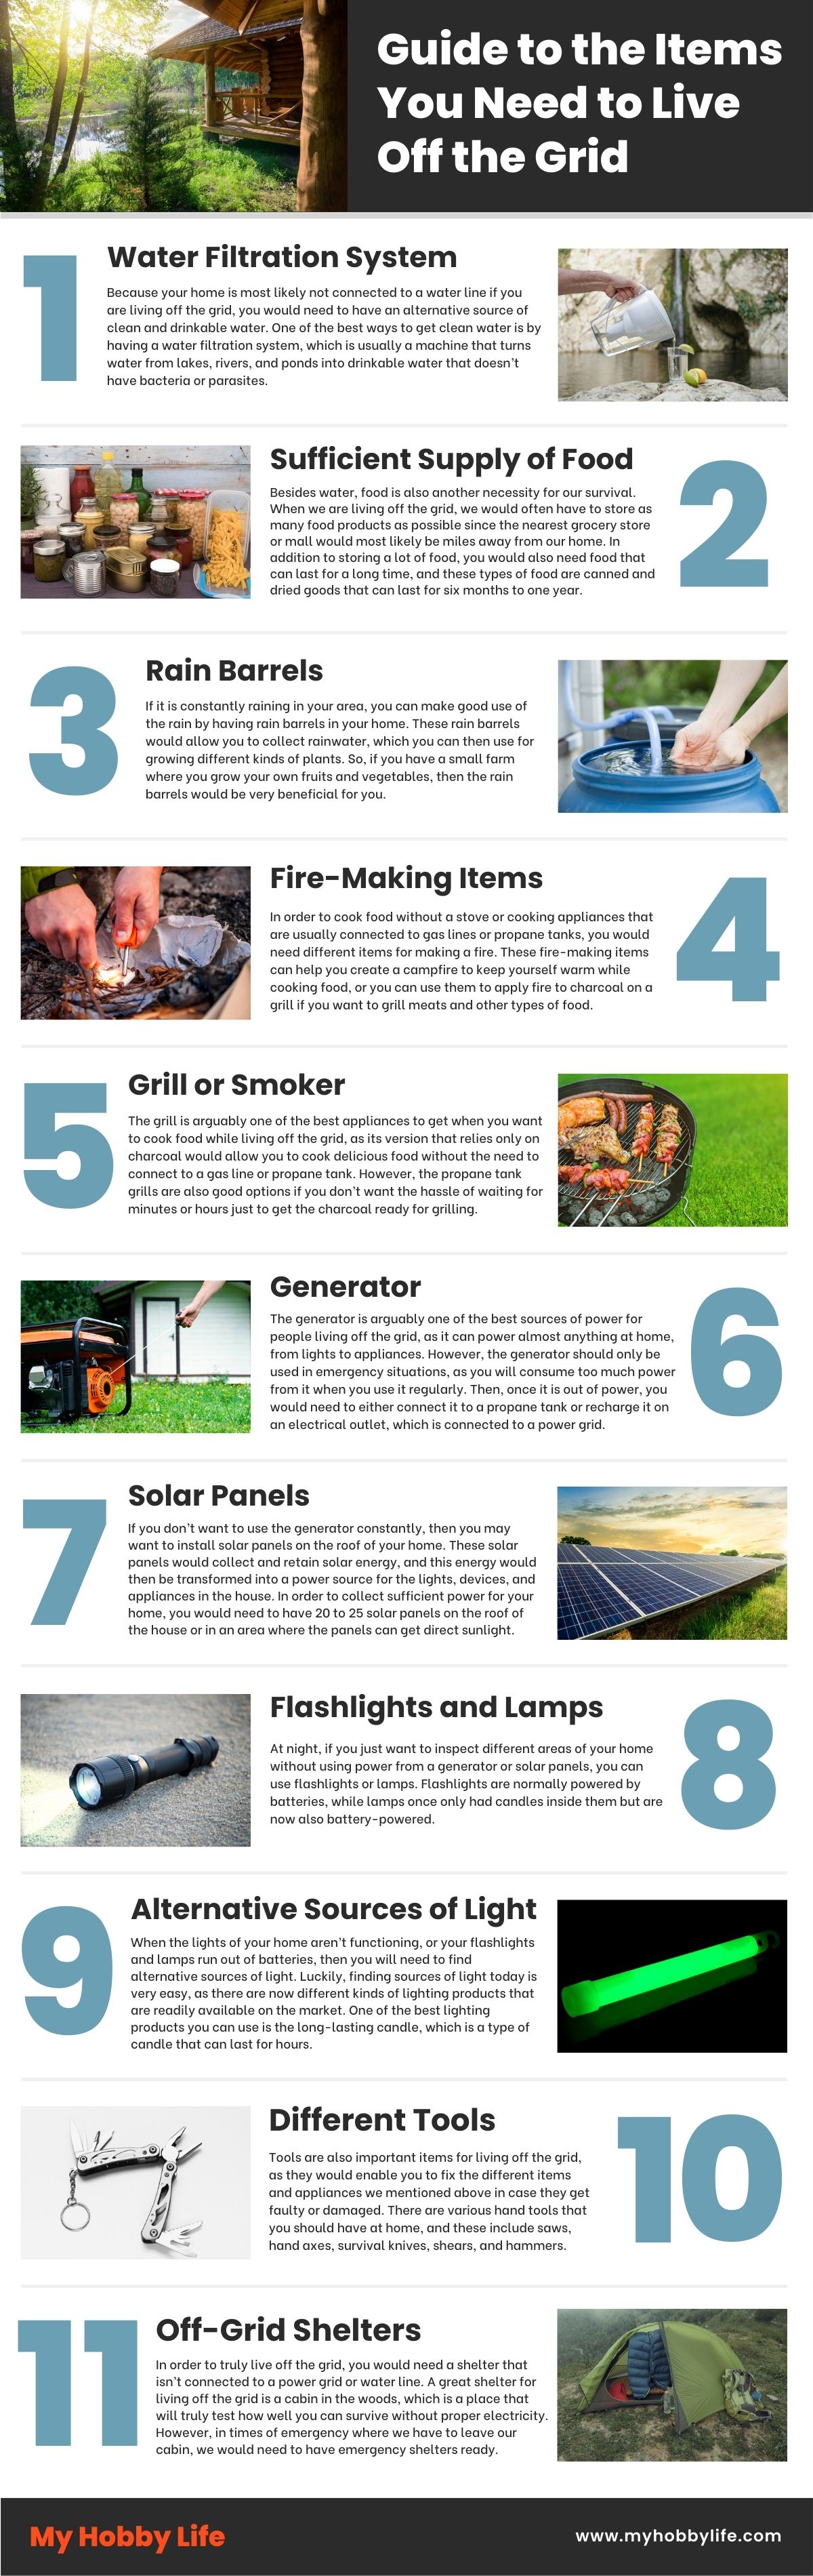 What Do You Need to Live Off-Grid?